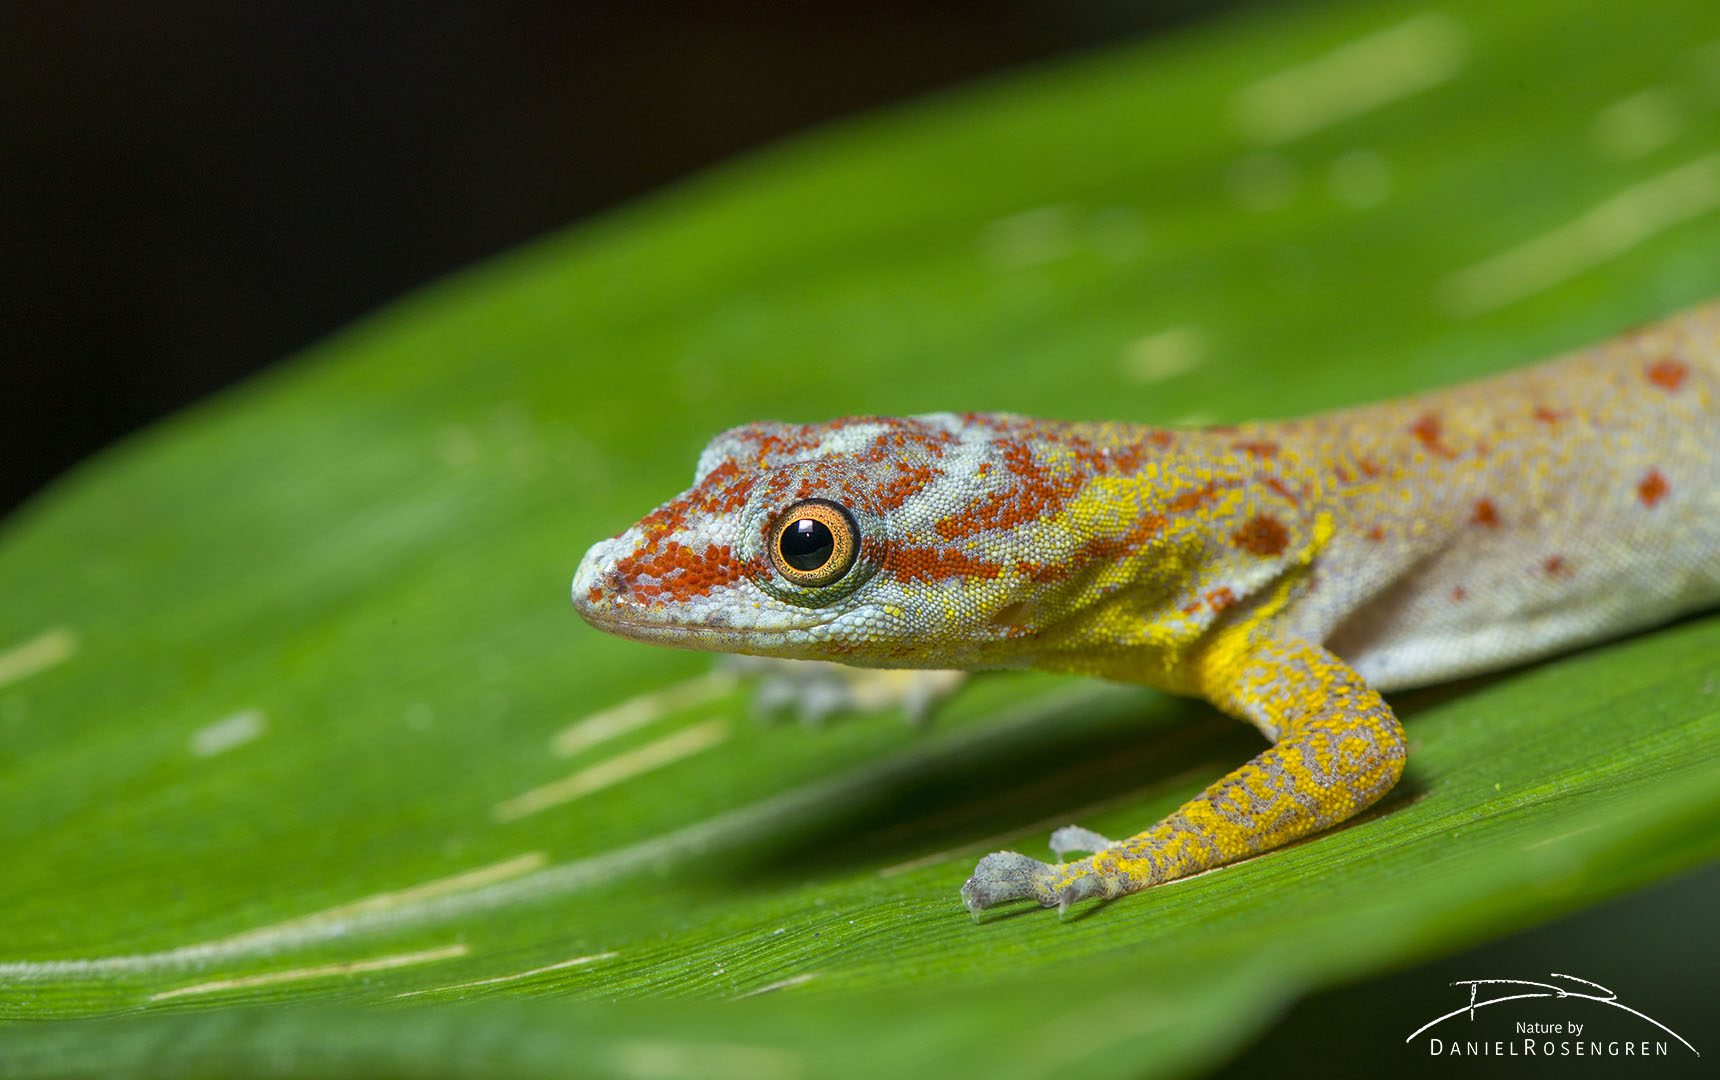 A Dwarf Gecko in Yaguas, famous for its ability to walk on the water tension. © Daniel Rosengren